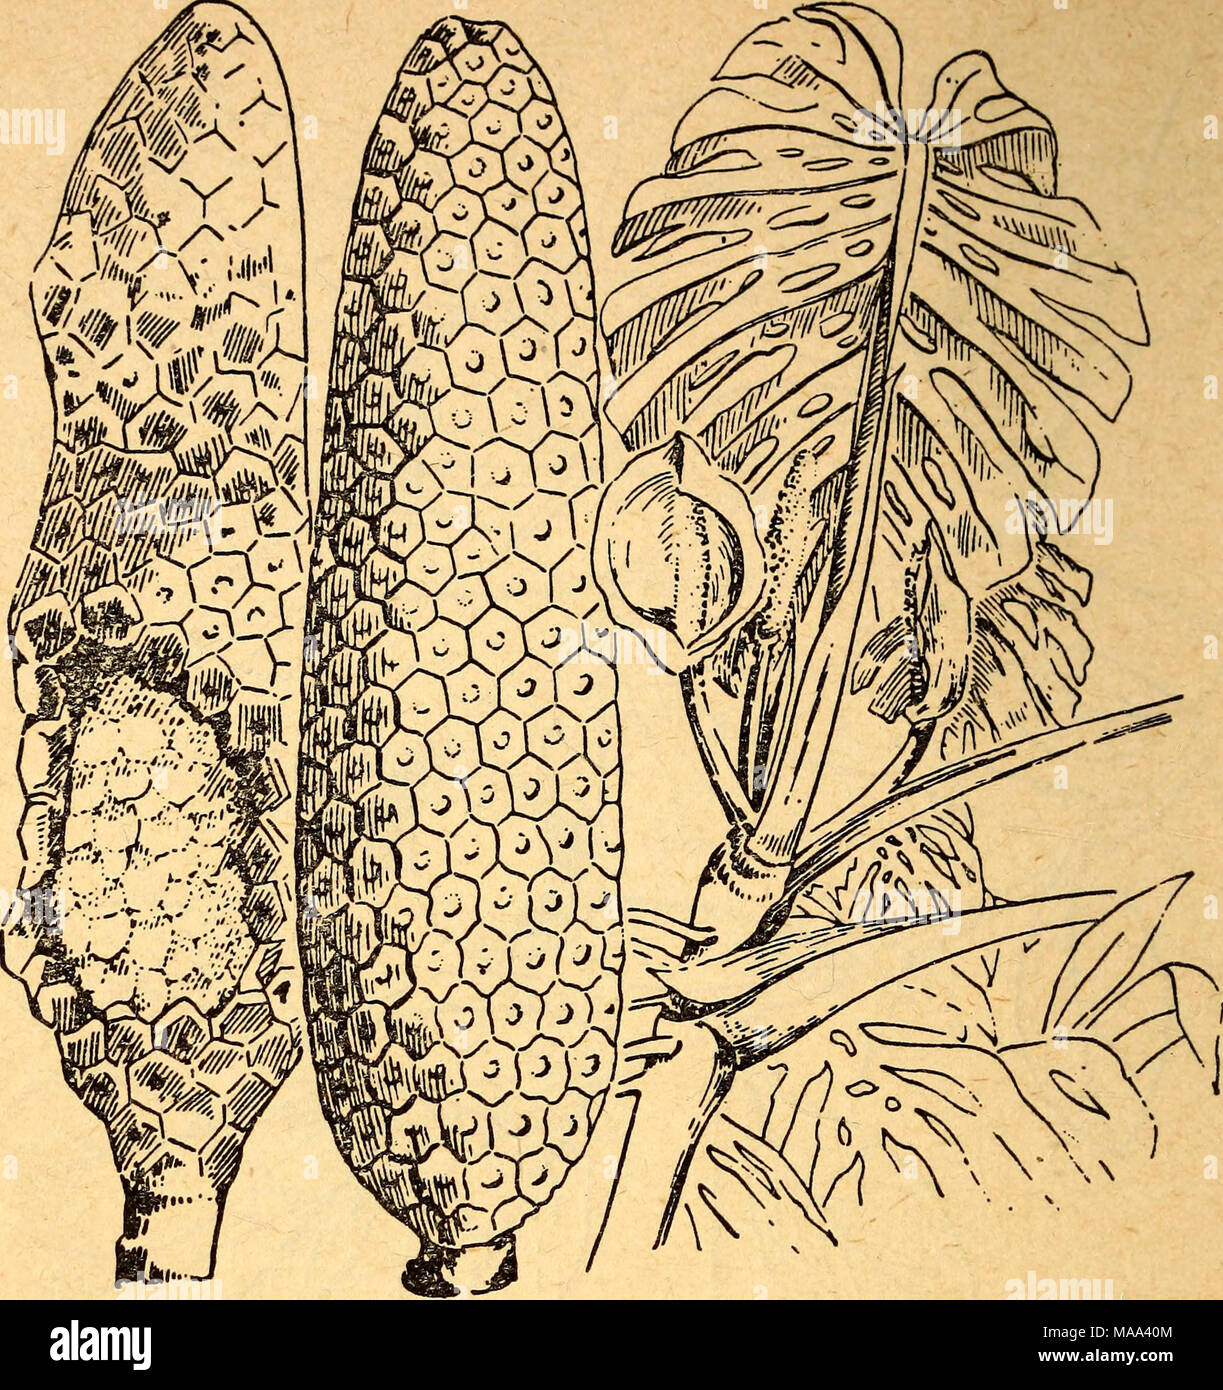 . Edible and poisonous plants of the Caribbean region . 21. Pi NAN ON A Monstera deliciosa The fruit of the pifianona vine is good to eat raw only when fully ripe. Caution: The immature fruit contains needlelike crystals that irritate the mouth. The large green fruit is the size and shape of a corncob. When the small, six-cornered scales begin to drop off the fruit and the deep green color lightens, it is a sure sign of ripeness. The stem of the plant may be placed in water to hasten ripening. This evergreen plant, a native of Mexico, grows in wet forests of many of the regions of tropical Ame Stock Photo